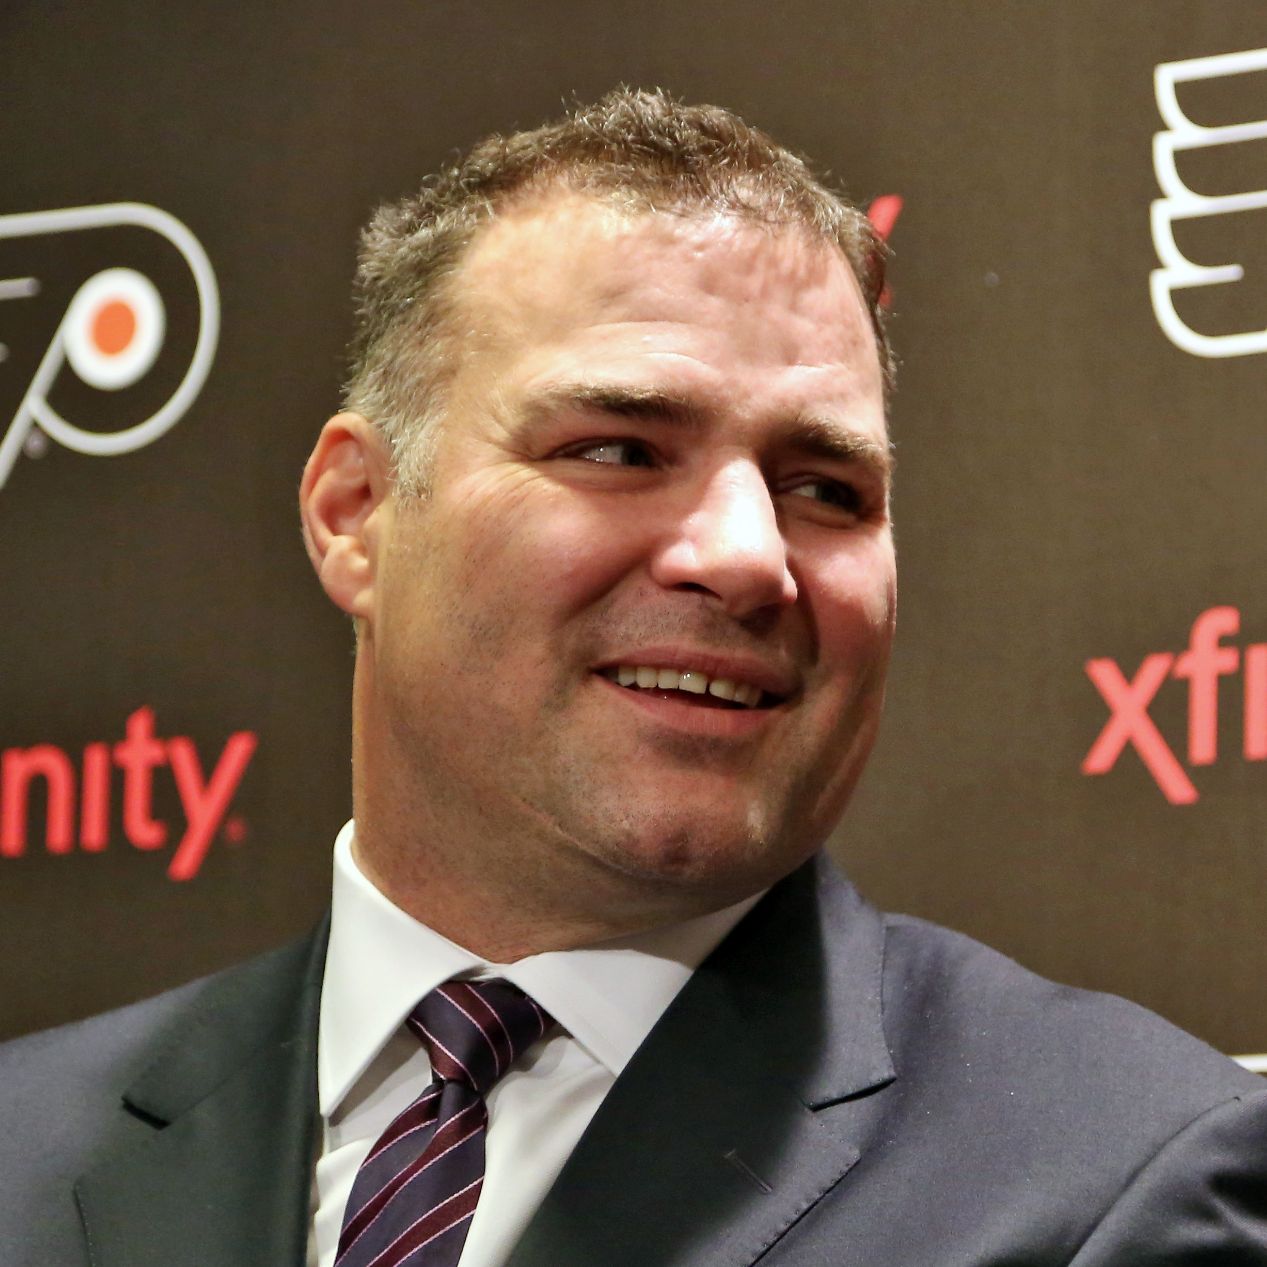 NHL: No Forgiving Eric Lindros, Julien Out at Bruins?, Rules League MUST Change